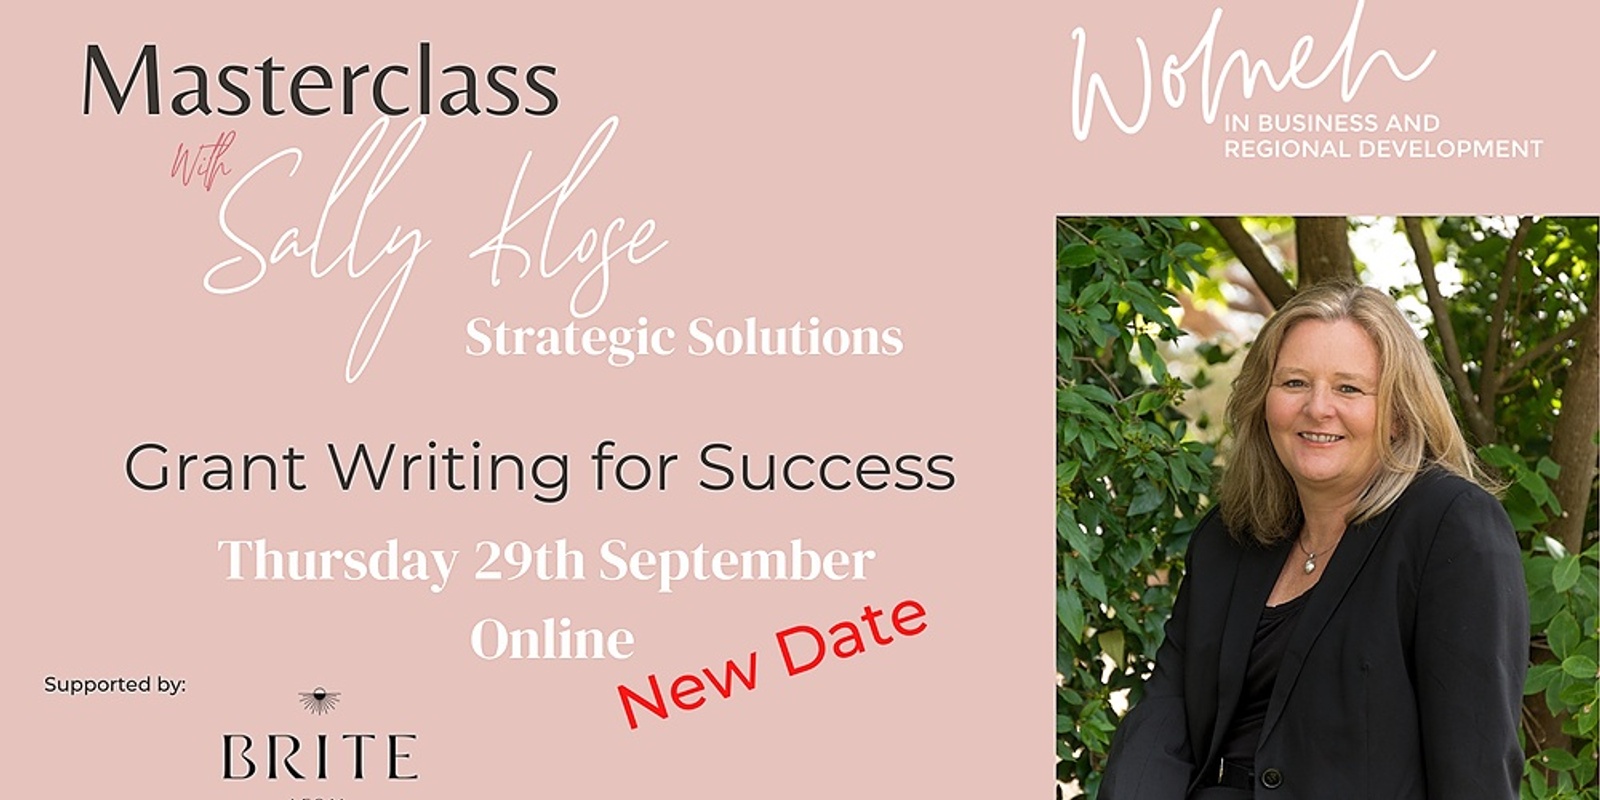 Banner image for WiBRD MasterClass with Sally Klose from Strategic Solutions, Grant Writing for Success